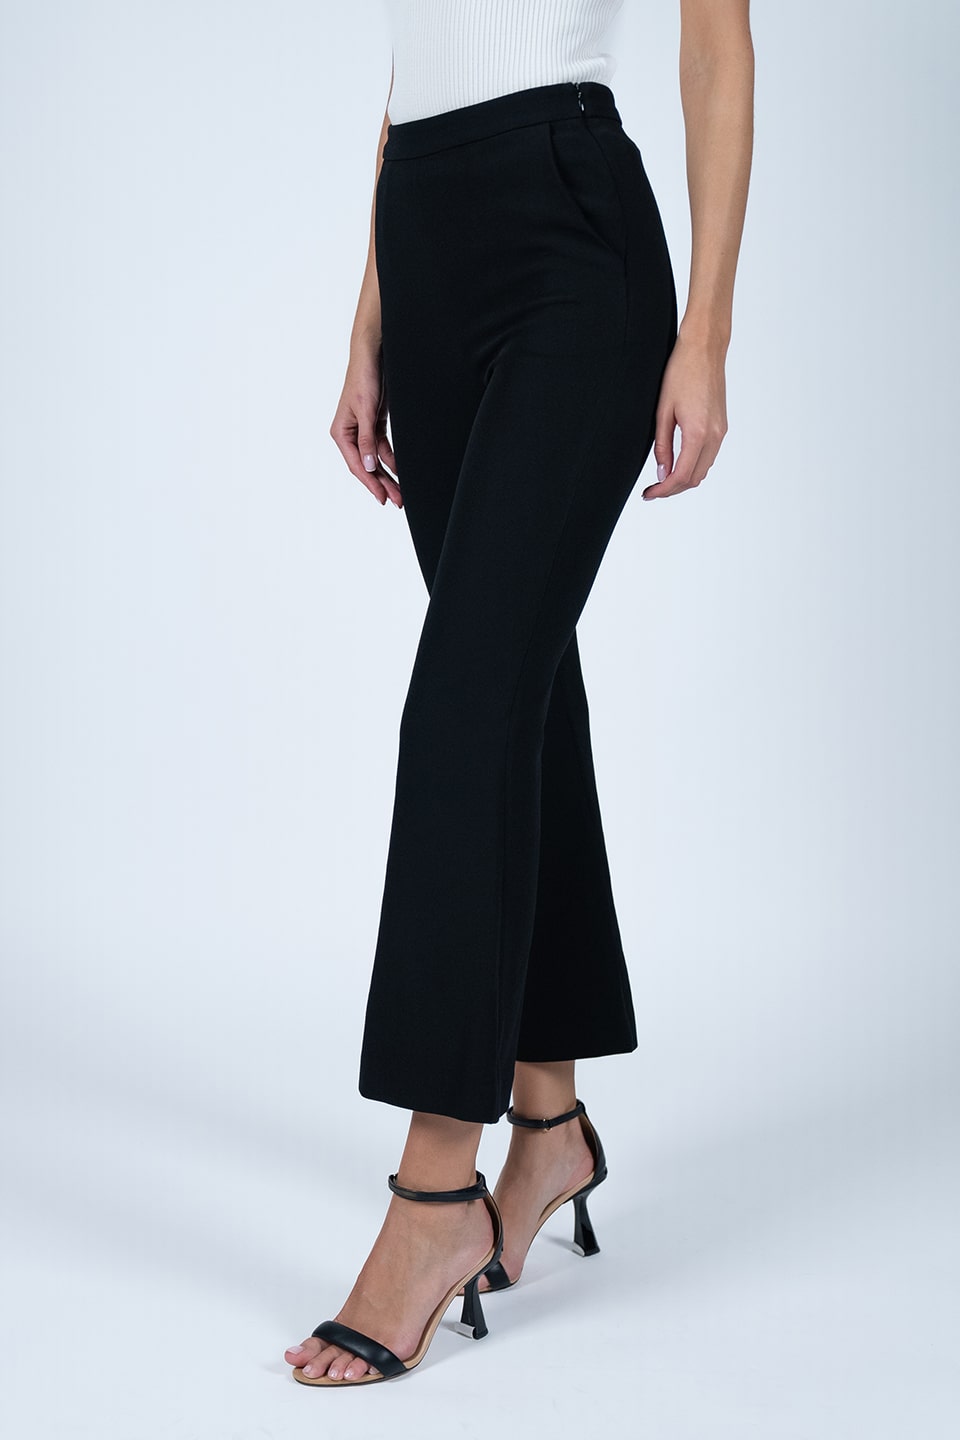 Thumbnail for Product gallery 4, Cady Black Trousers